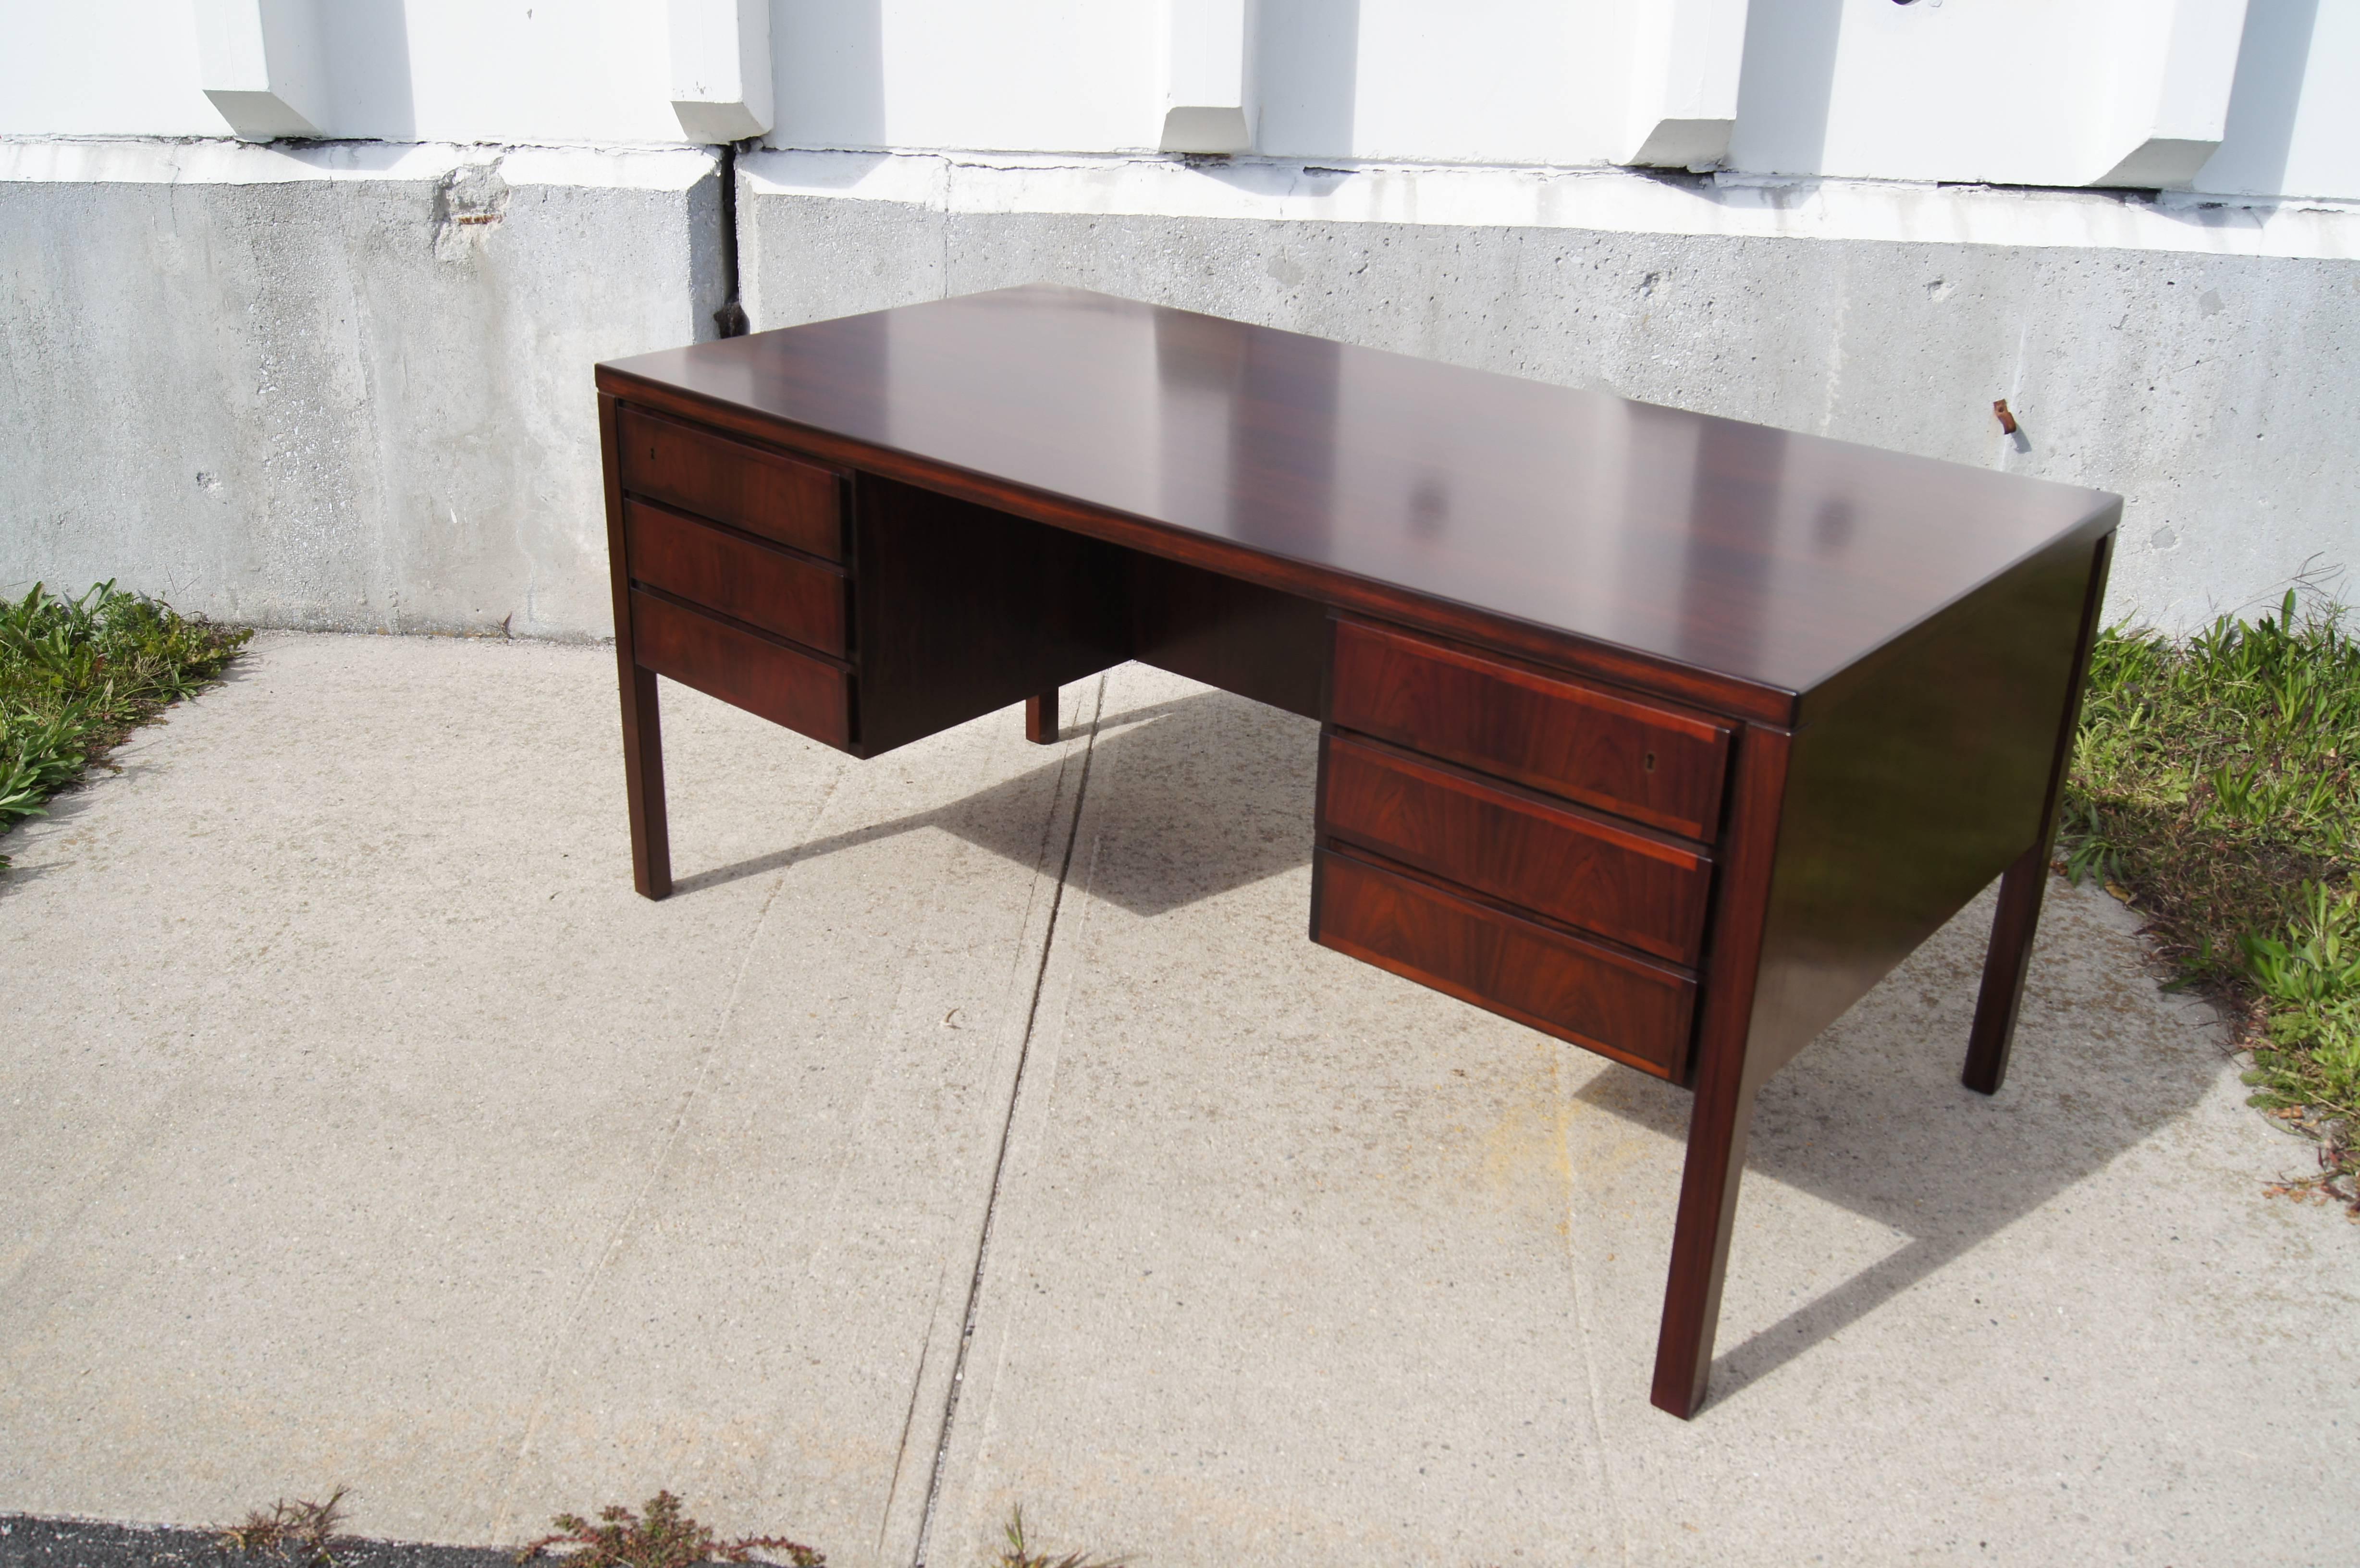 Handsome from every angle, this double-sided rosewood desk by Gunni Omann for Danish cabinetmaker Edmund Jorgensen positions three drawers to either side of the chair opening. On the finished back, two ample storage spaces bracket a drop-down door